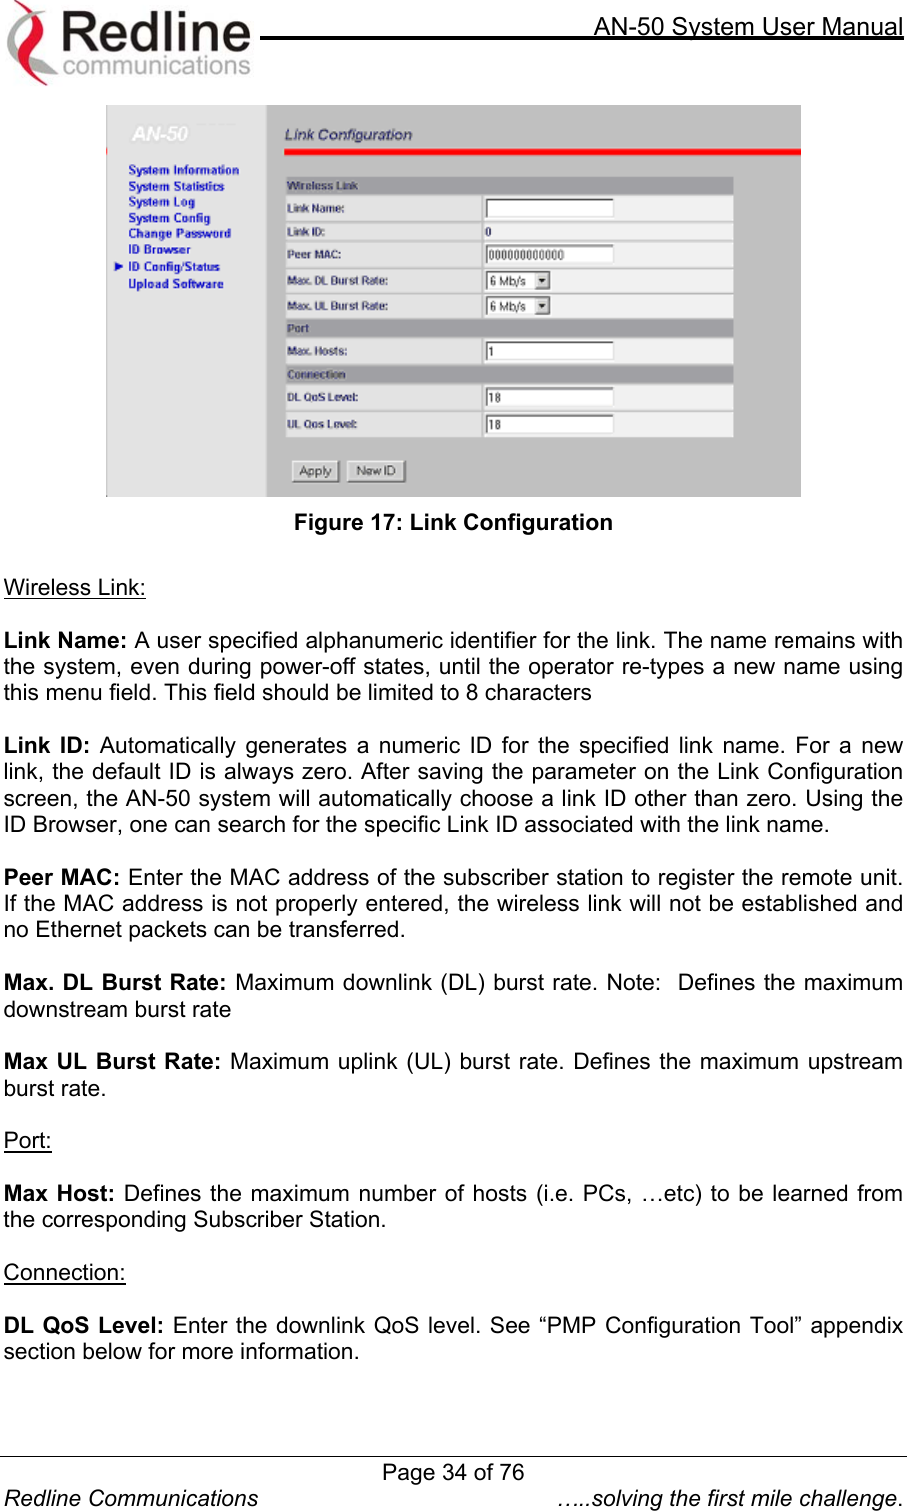     AN-50 System User Manual  Redline Communications  …..solving the first mile challenge.  Figure 17: Link Configuration  Wireless Link:  Link Name: A user specified alphanumeric identifier for the link. The name remains with the system, even during power-off states, until the operator re-types a new name using this menu field. This field should be limited to 8 characters  Link ID: Automatically generates a numeric ID for the specified link name. For a new link, the default ID is always zero. After saving the parameter on the Link Configuration screen, the AN-50 system will automatically choose a link ID other than zero. Using the ID Browser, one can search for the specific Link ID associated with the link name.  Peer MAC: Enter the MAC address of the subscriber station to register the remote unit.  If the MAC address is not properly entered, the wireless link will not be established and no Ethernet packets can be transferred.   Max. DL Burst Rate: Maximum downlink (DL) burst rate. Note:  Defines the maximum downstream burst rate  Max UL Burst Rate: Maximum uplink (UL) burst rate. Defines the maximum upstream burst rate.  Port:  Max Host: Defines the maximum number of hosts (i.e. PCs, …etc) to be learned from the corresponding Subscriber Station.  Connection:  DL QoS Level: Enter the downlink QoS level. See “PMP Configuration Tool” appendix section below for more information.  Page 34 of 76